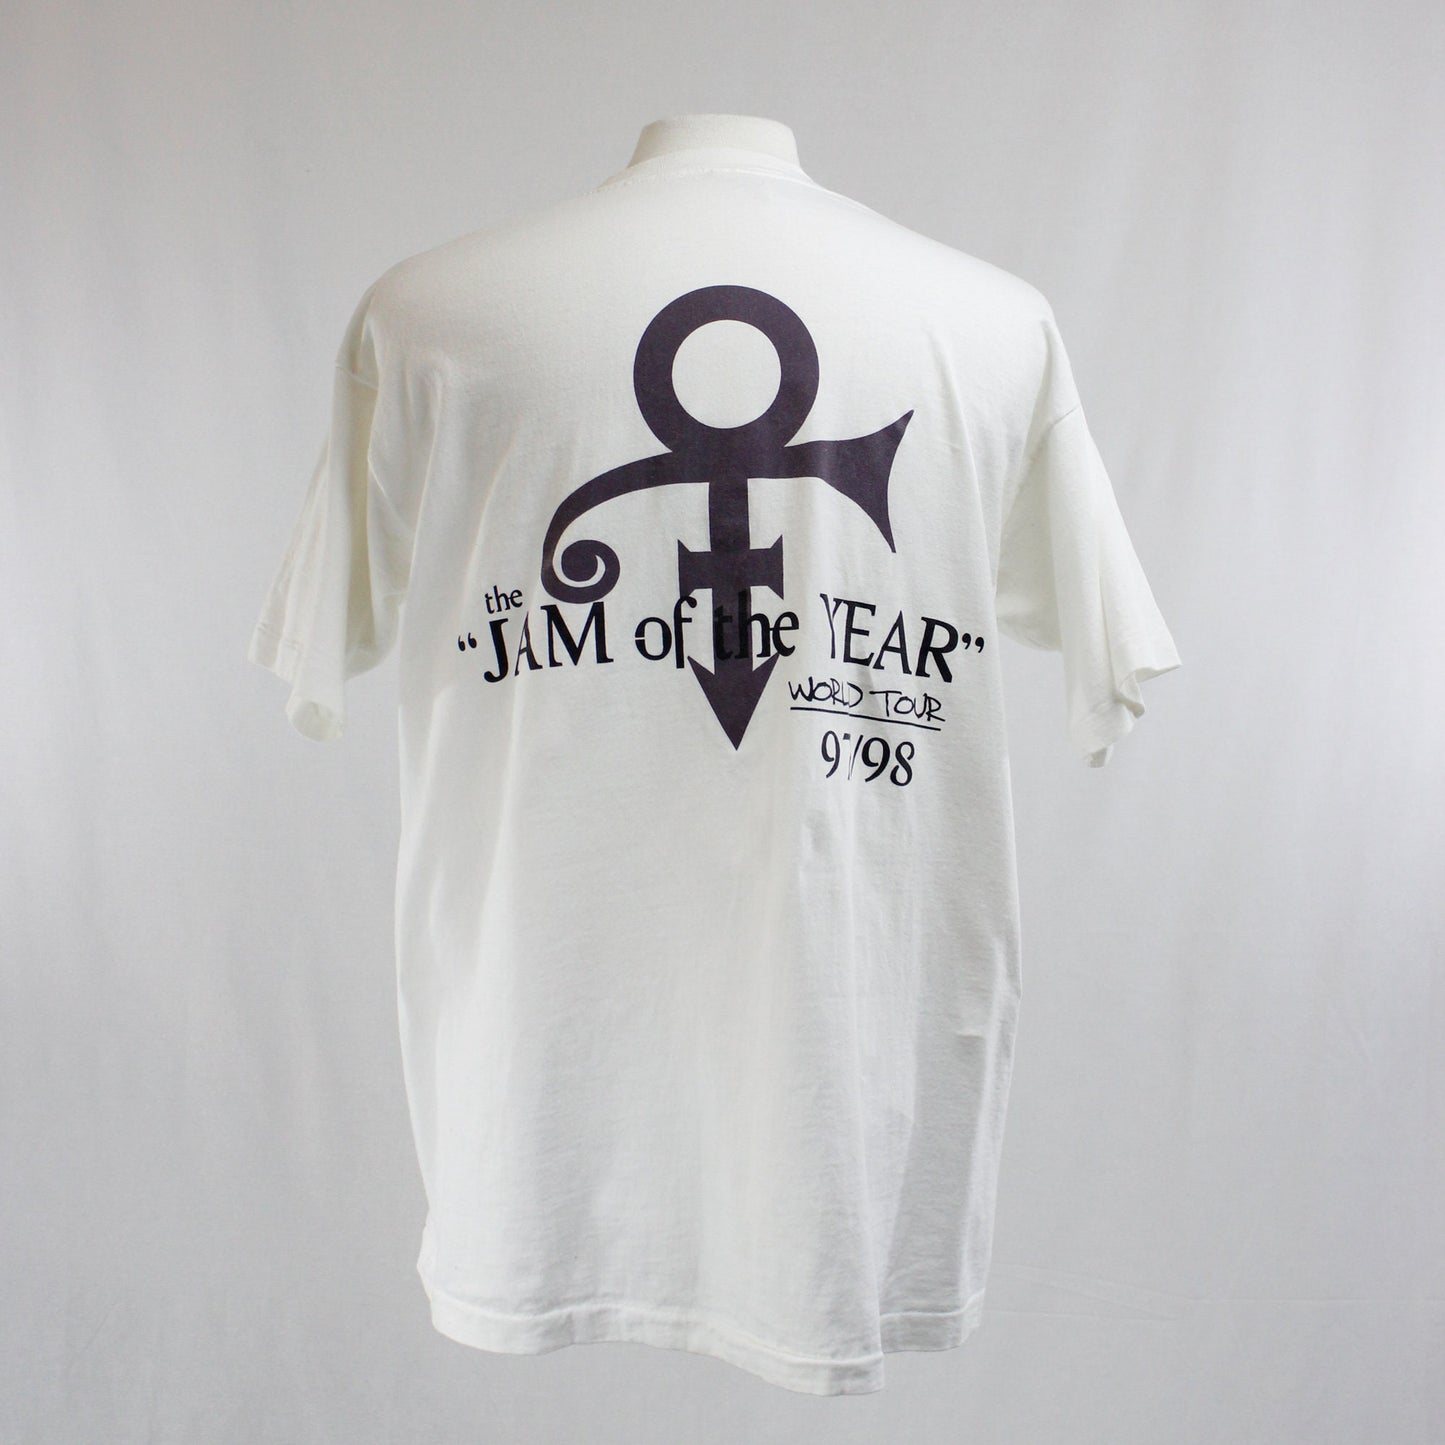 Vintage 90s Prince T-shirt Jam of the Year World Tour Tee 97 / 98 Rare Grail Single Stitch Made in USA Mint Condition